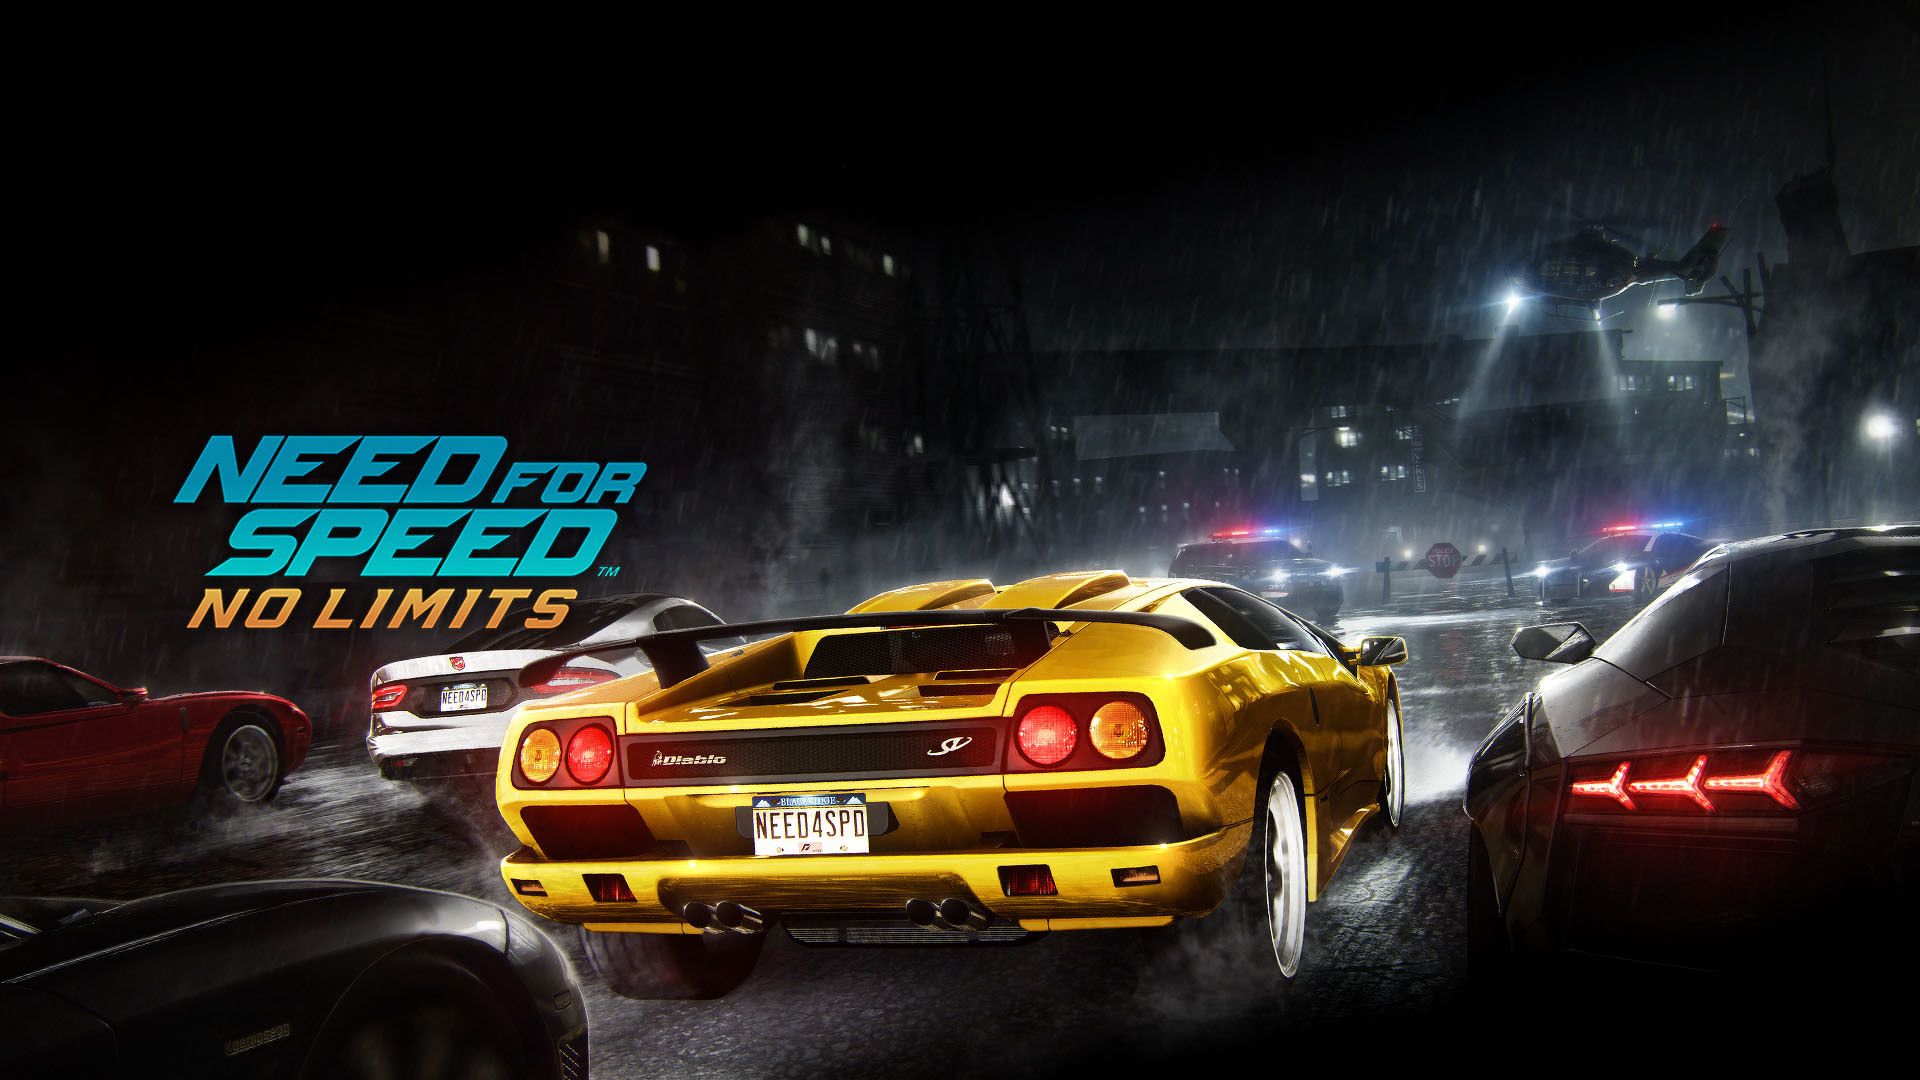 Need for Speed No Limits Devils Run trailer. Motor1.com Photo